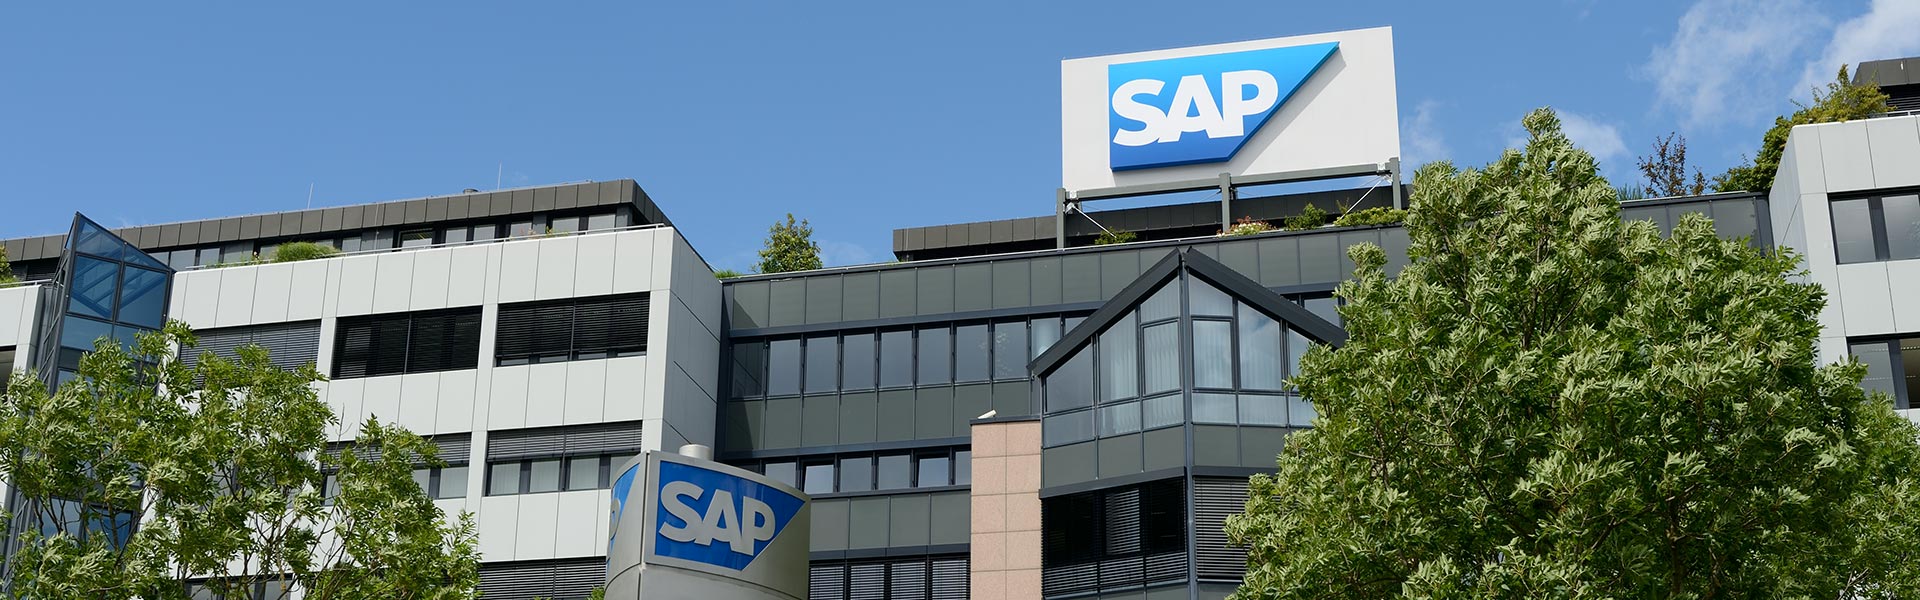 SAP Working With Google to Accelerate Android™ for Work Adoption in the Enterprise